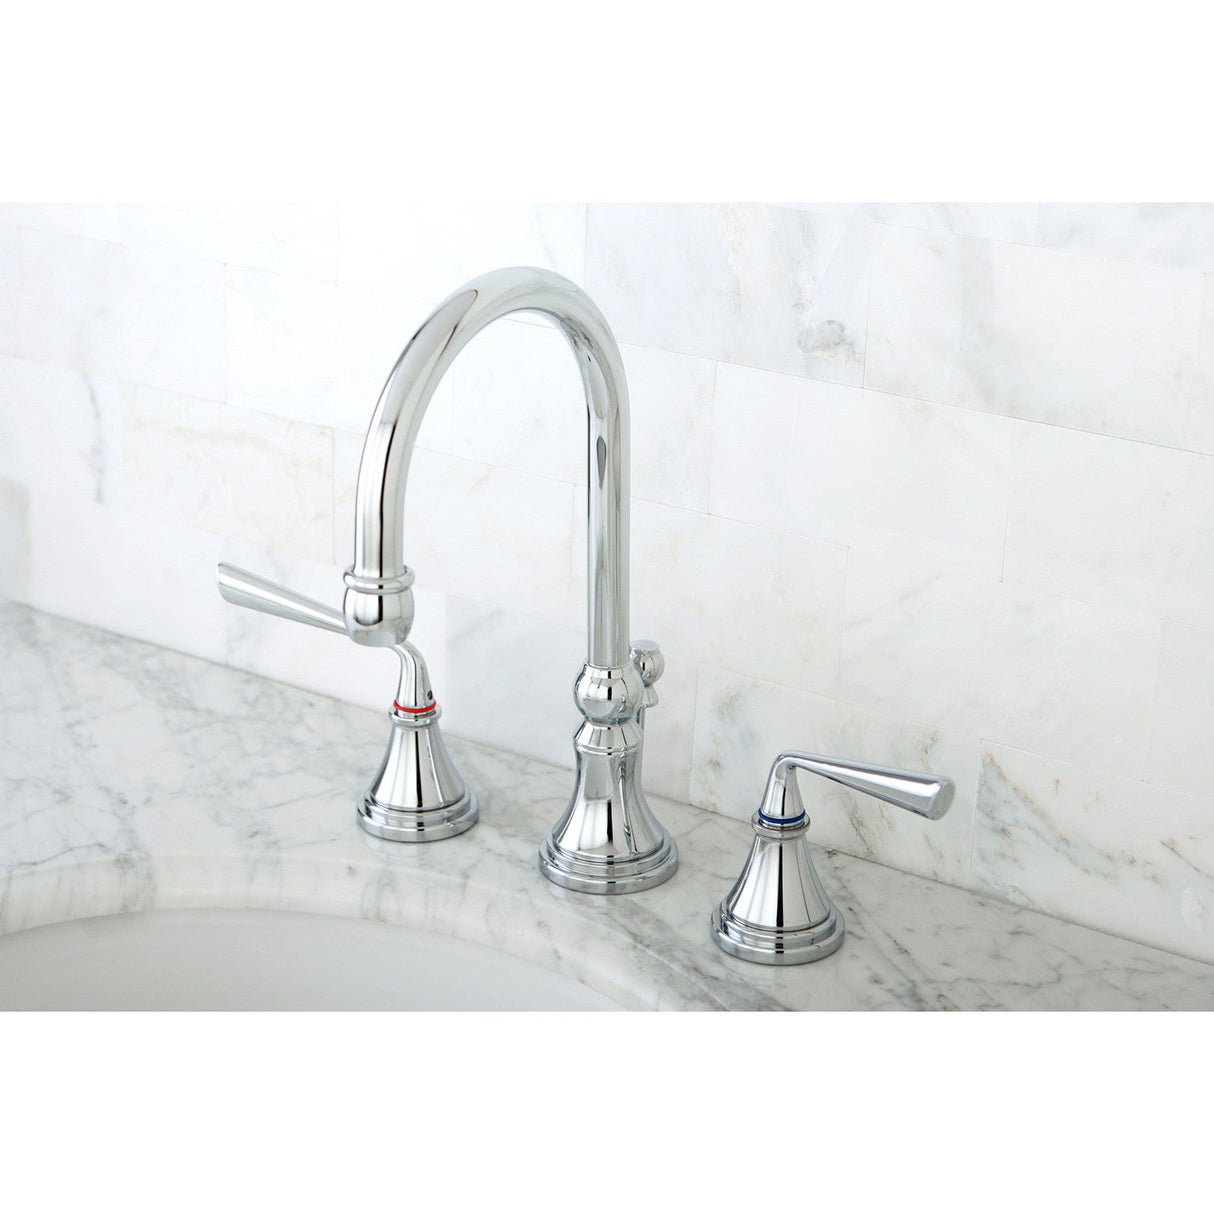 Silver Sage KS2981ZL Two-Handle 3-Hole Deck Mount Widespread Bathroom Faucet with Brass Pop-Up, Polished Chrome